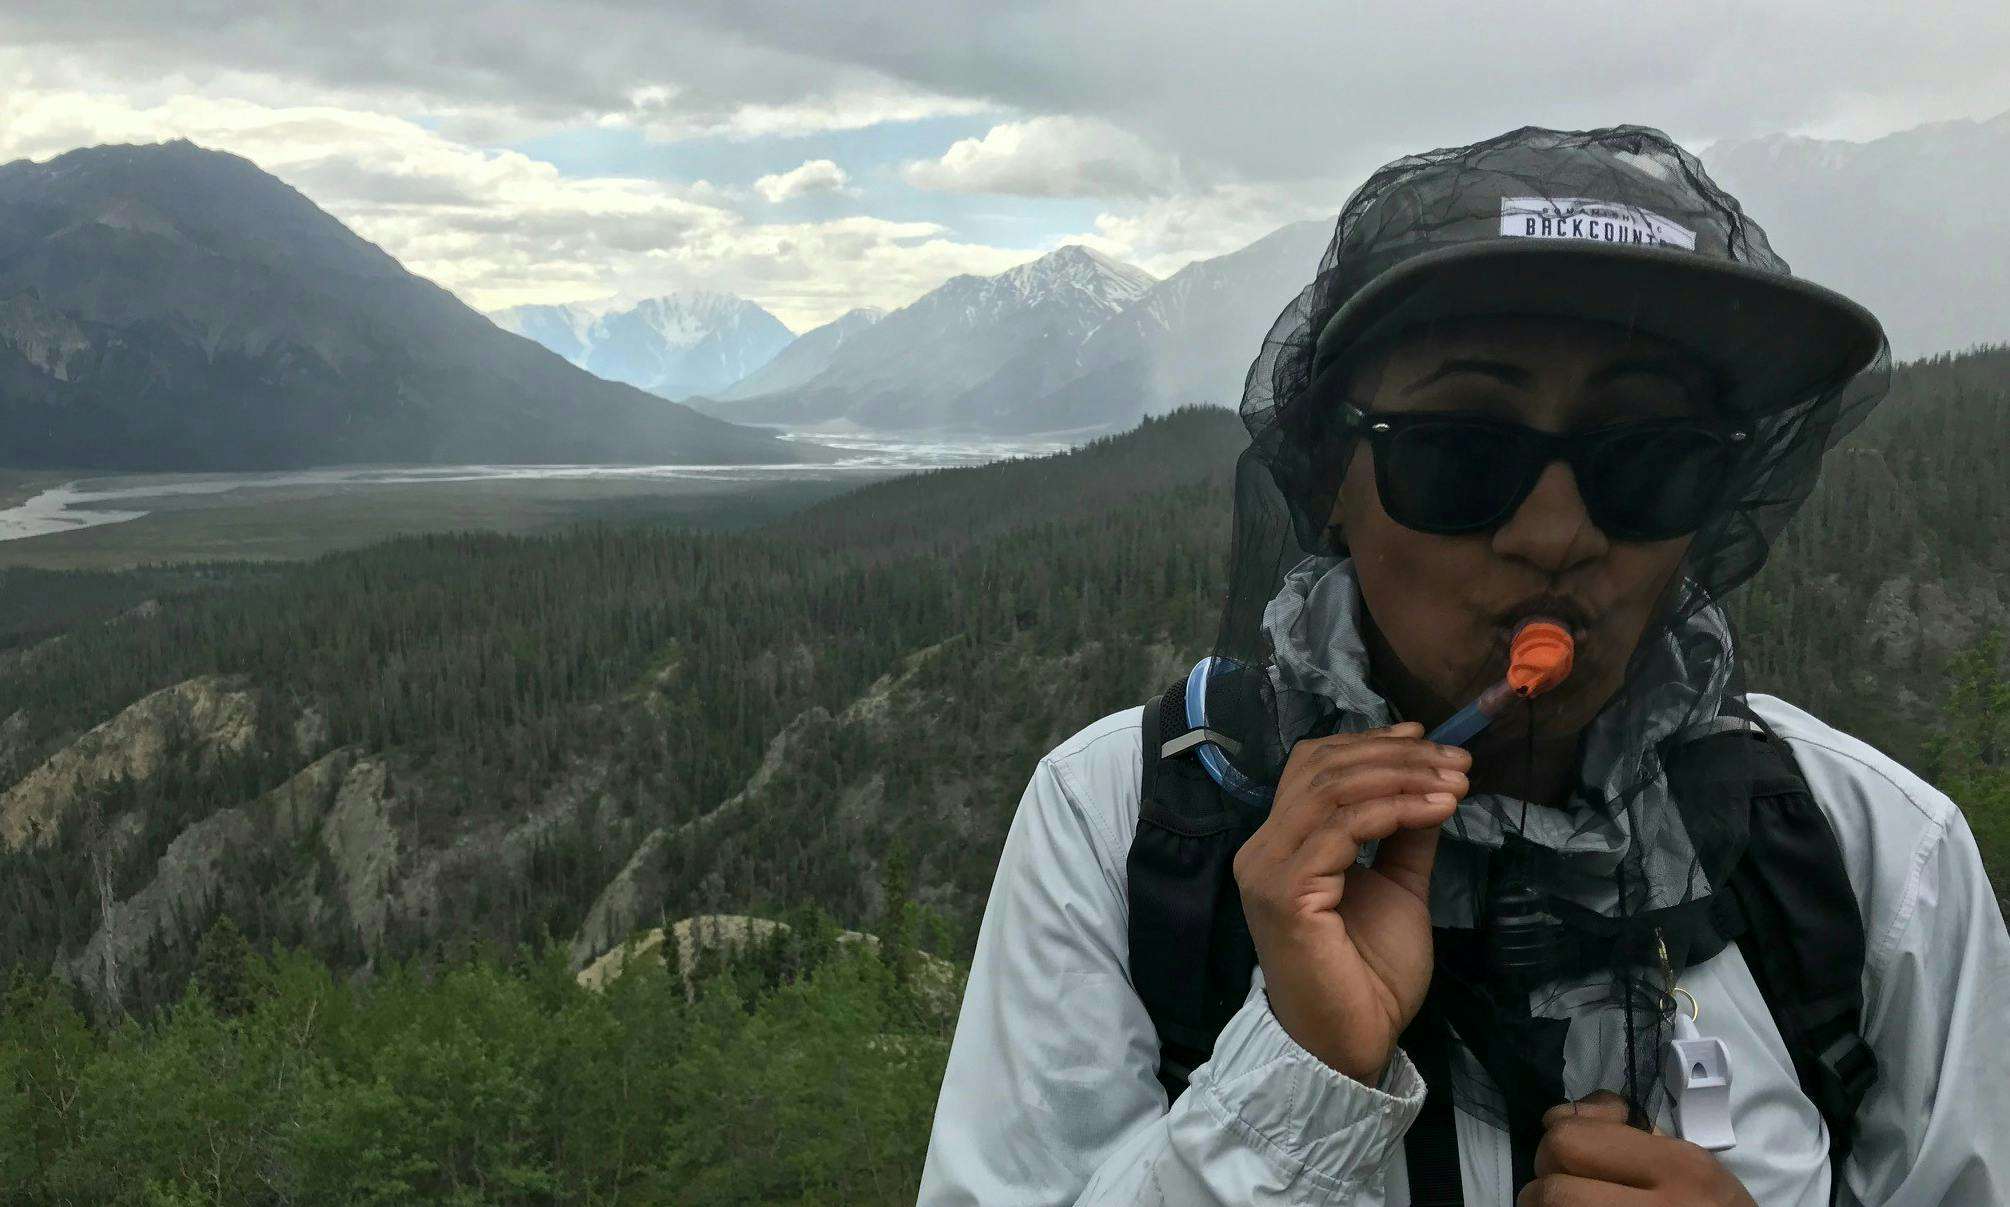 A hydration pack makes it easy to sip water under a bug hat when you’re hiking.